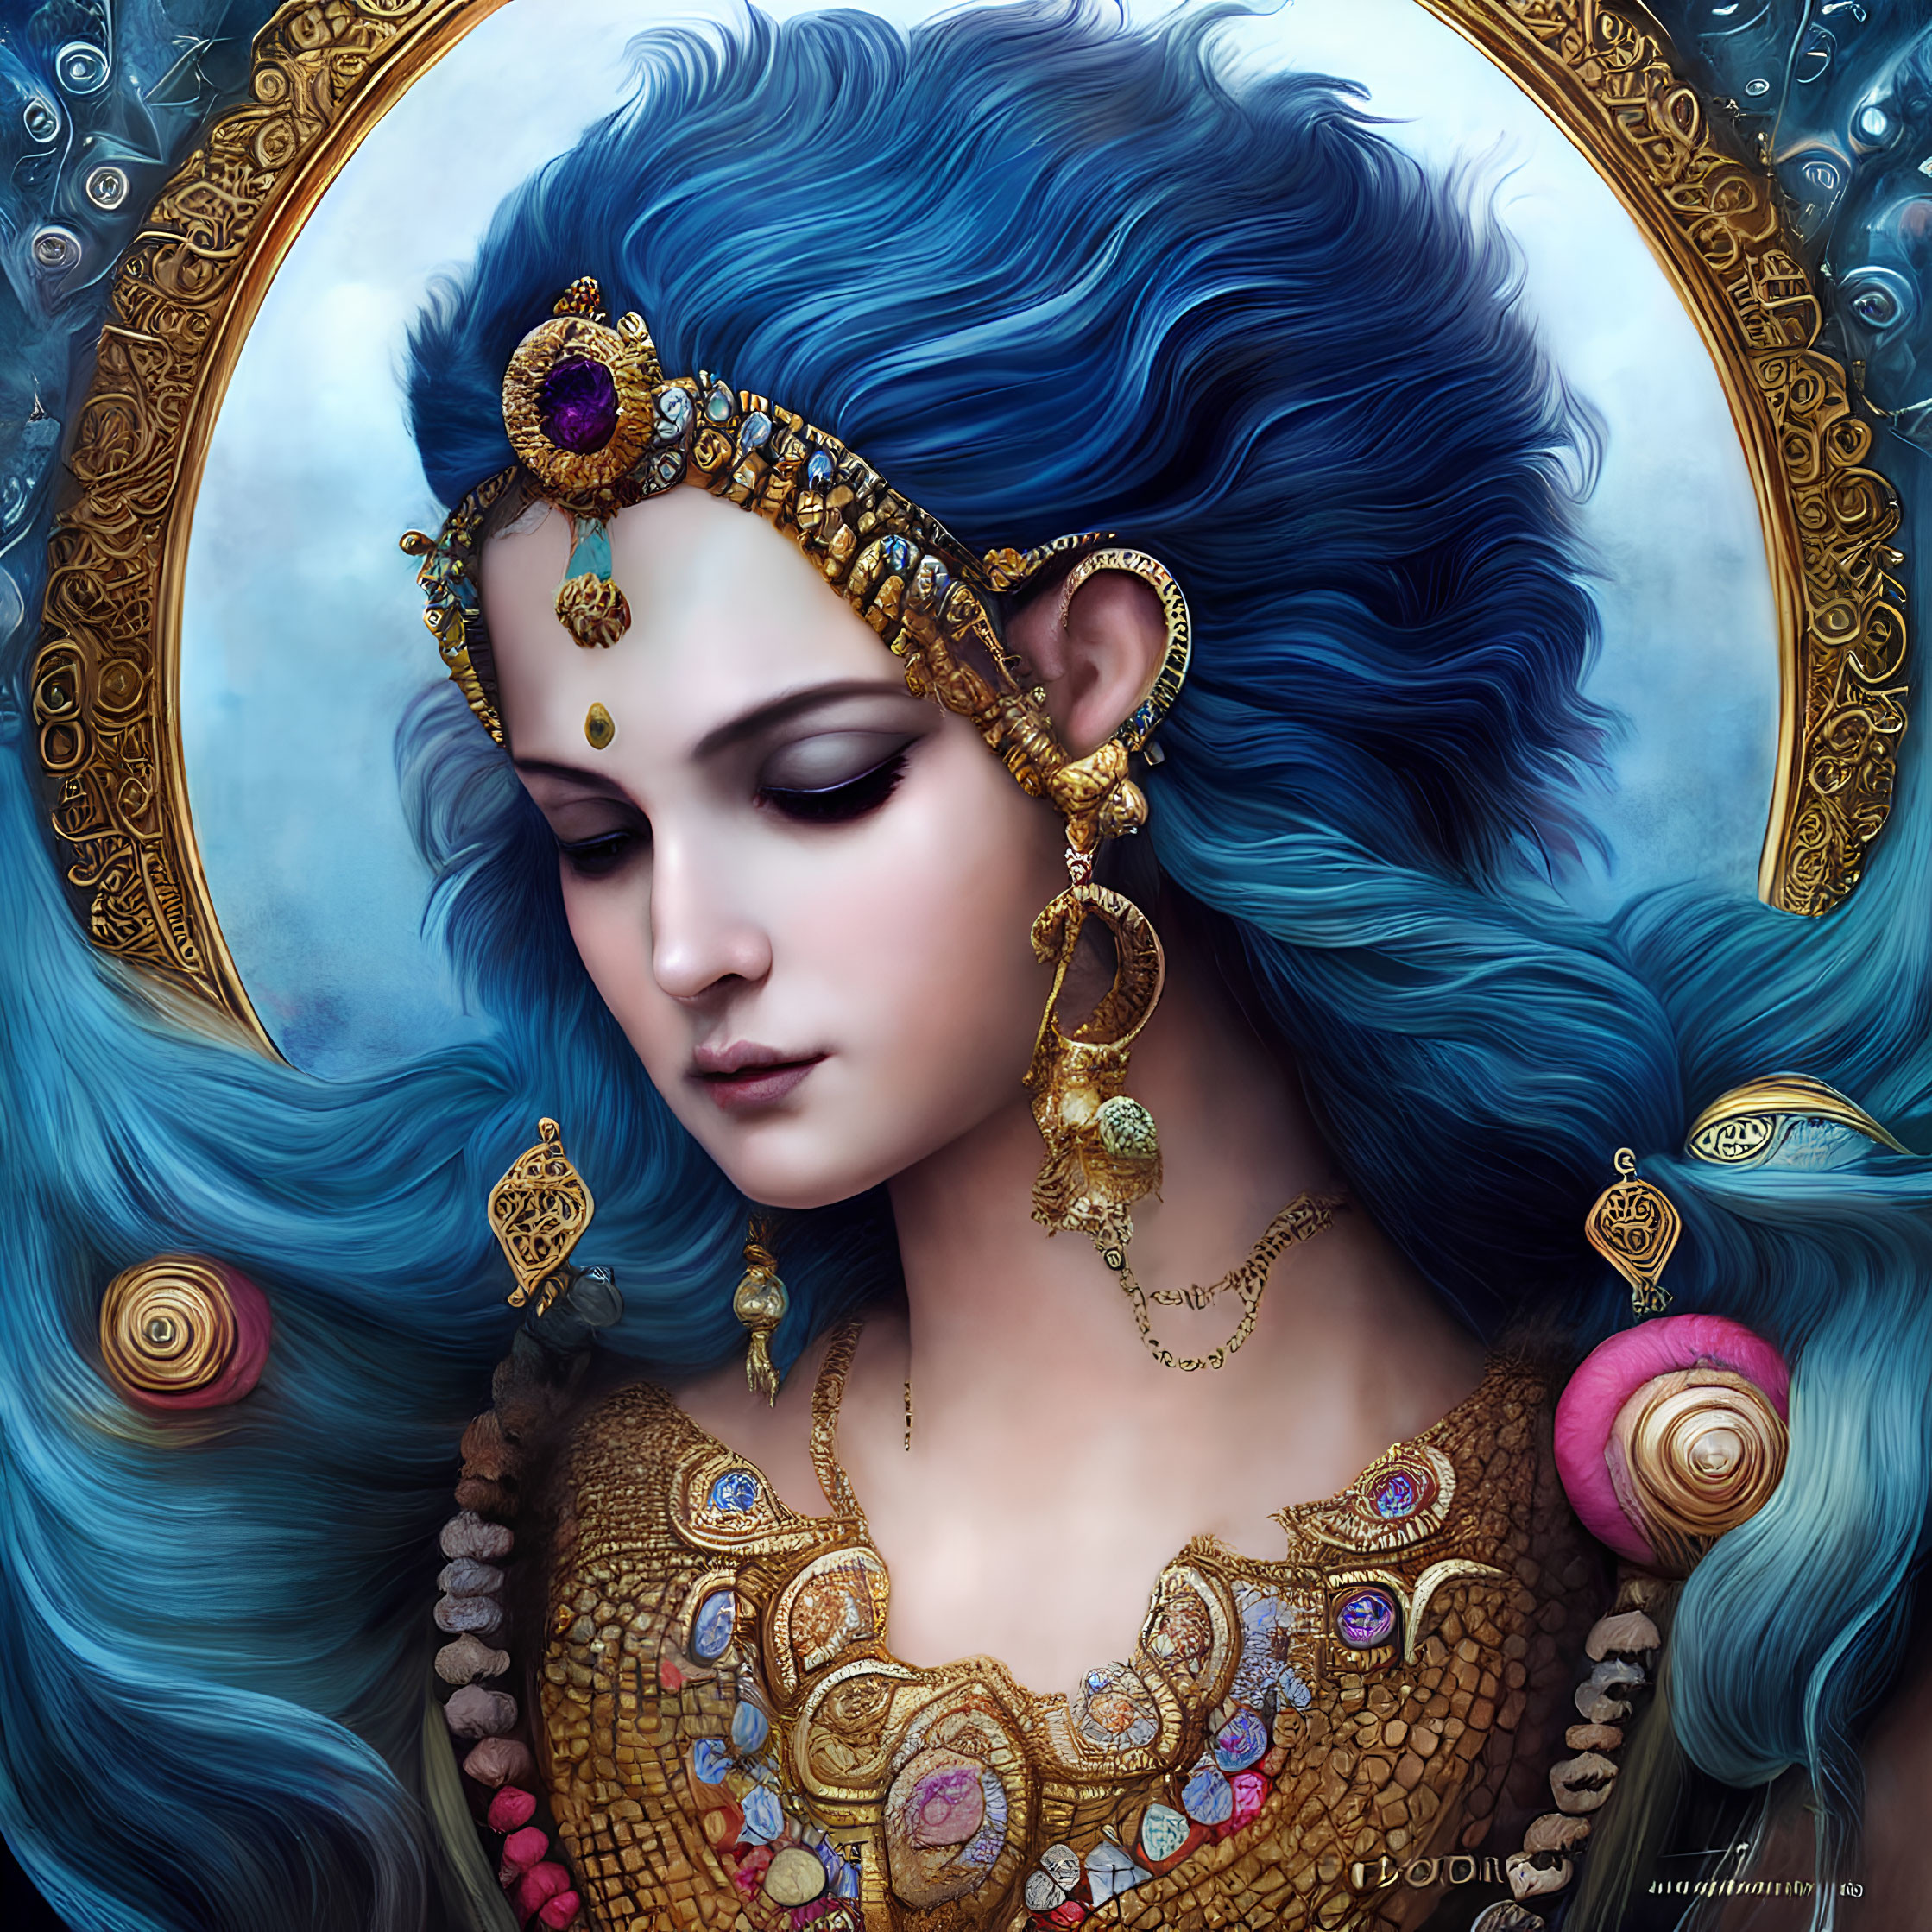 Woman with Blue Hair and Golden Jewelry on Blue Background